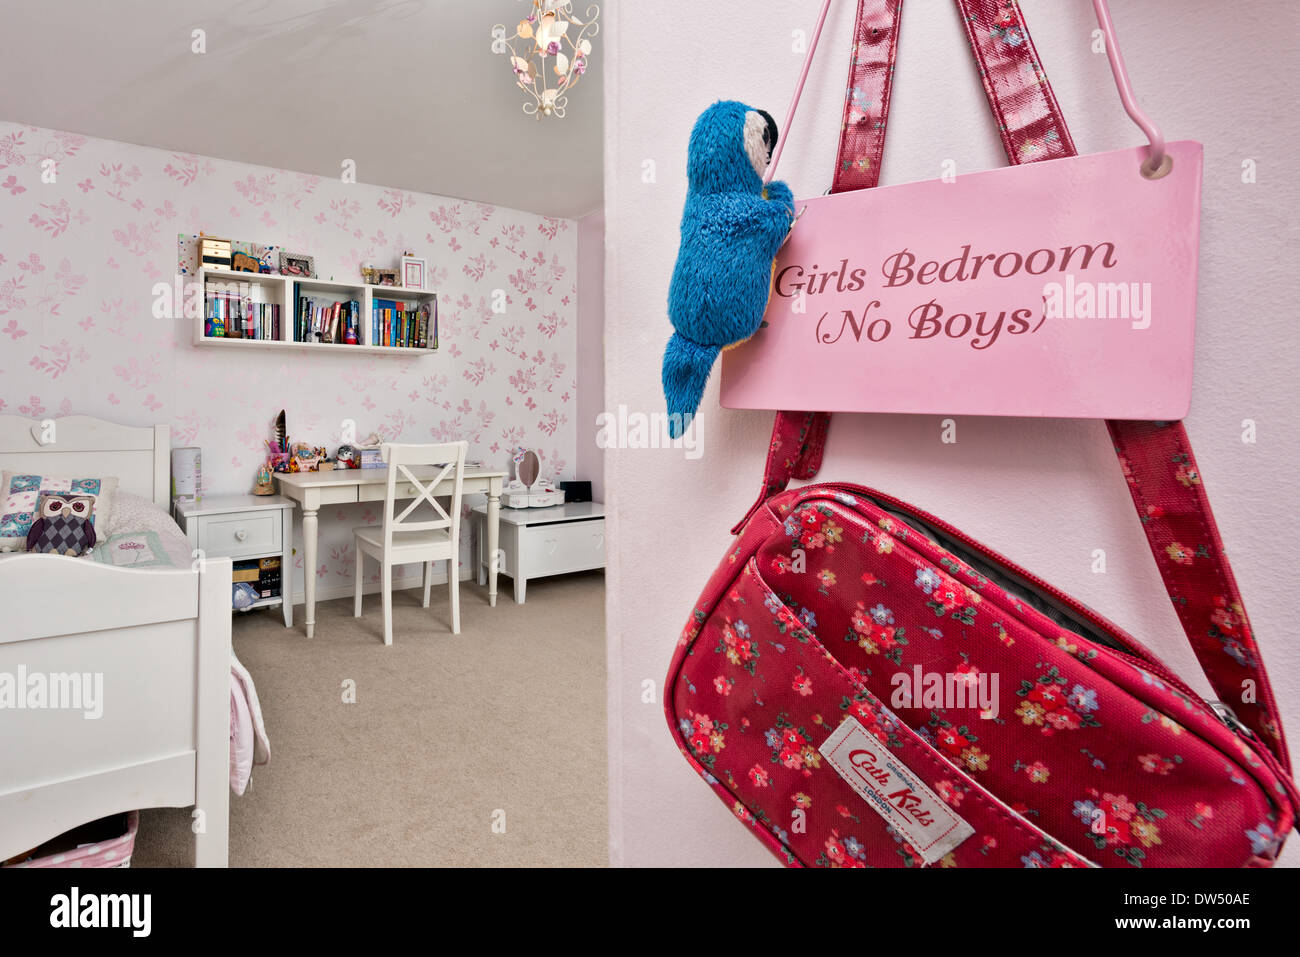 A cute pink sign hanging in kids room with a childs hanbag & plush parrot exclaiming Girls bedroom, no boys Stock Photo